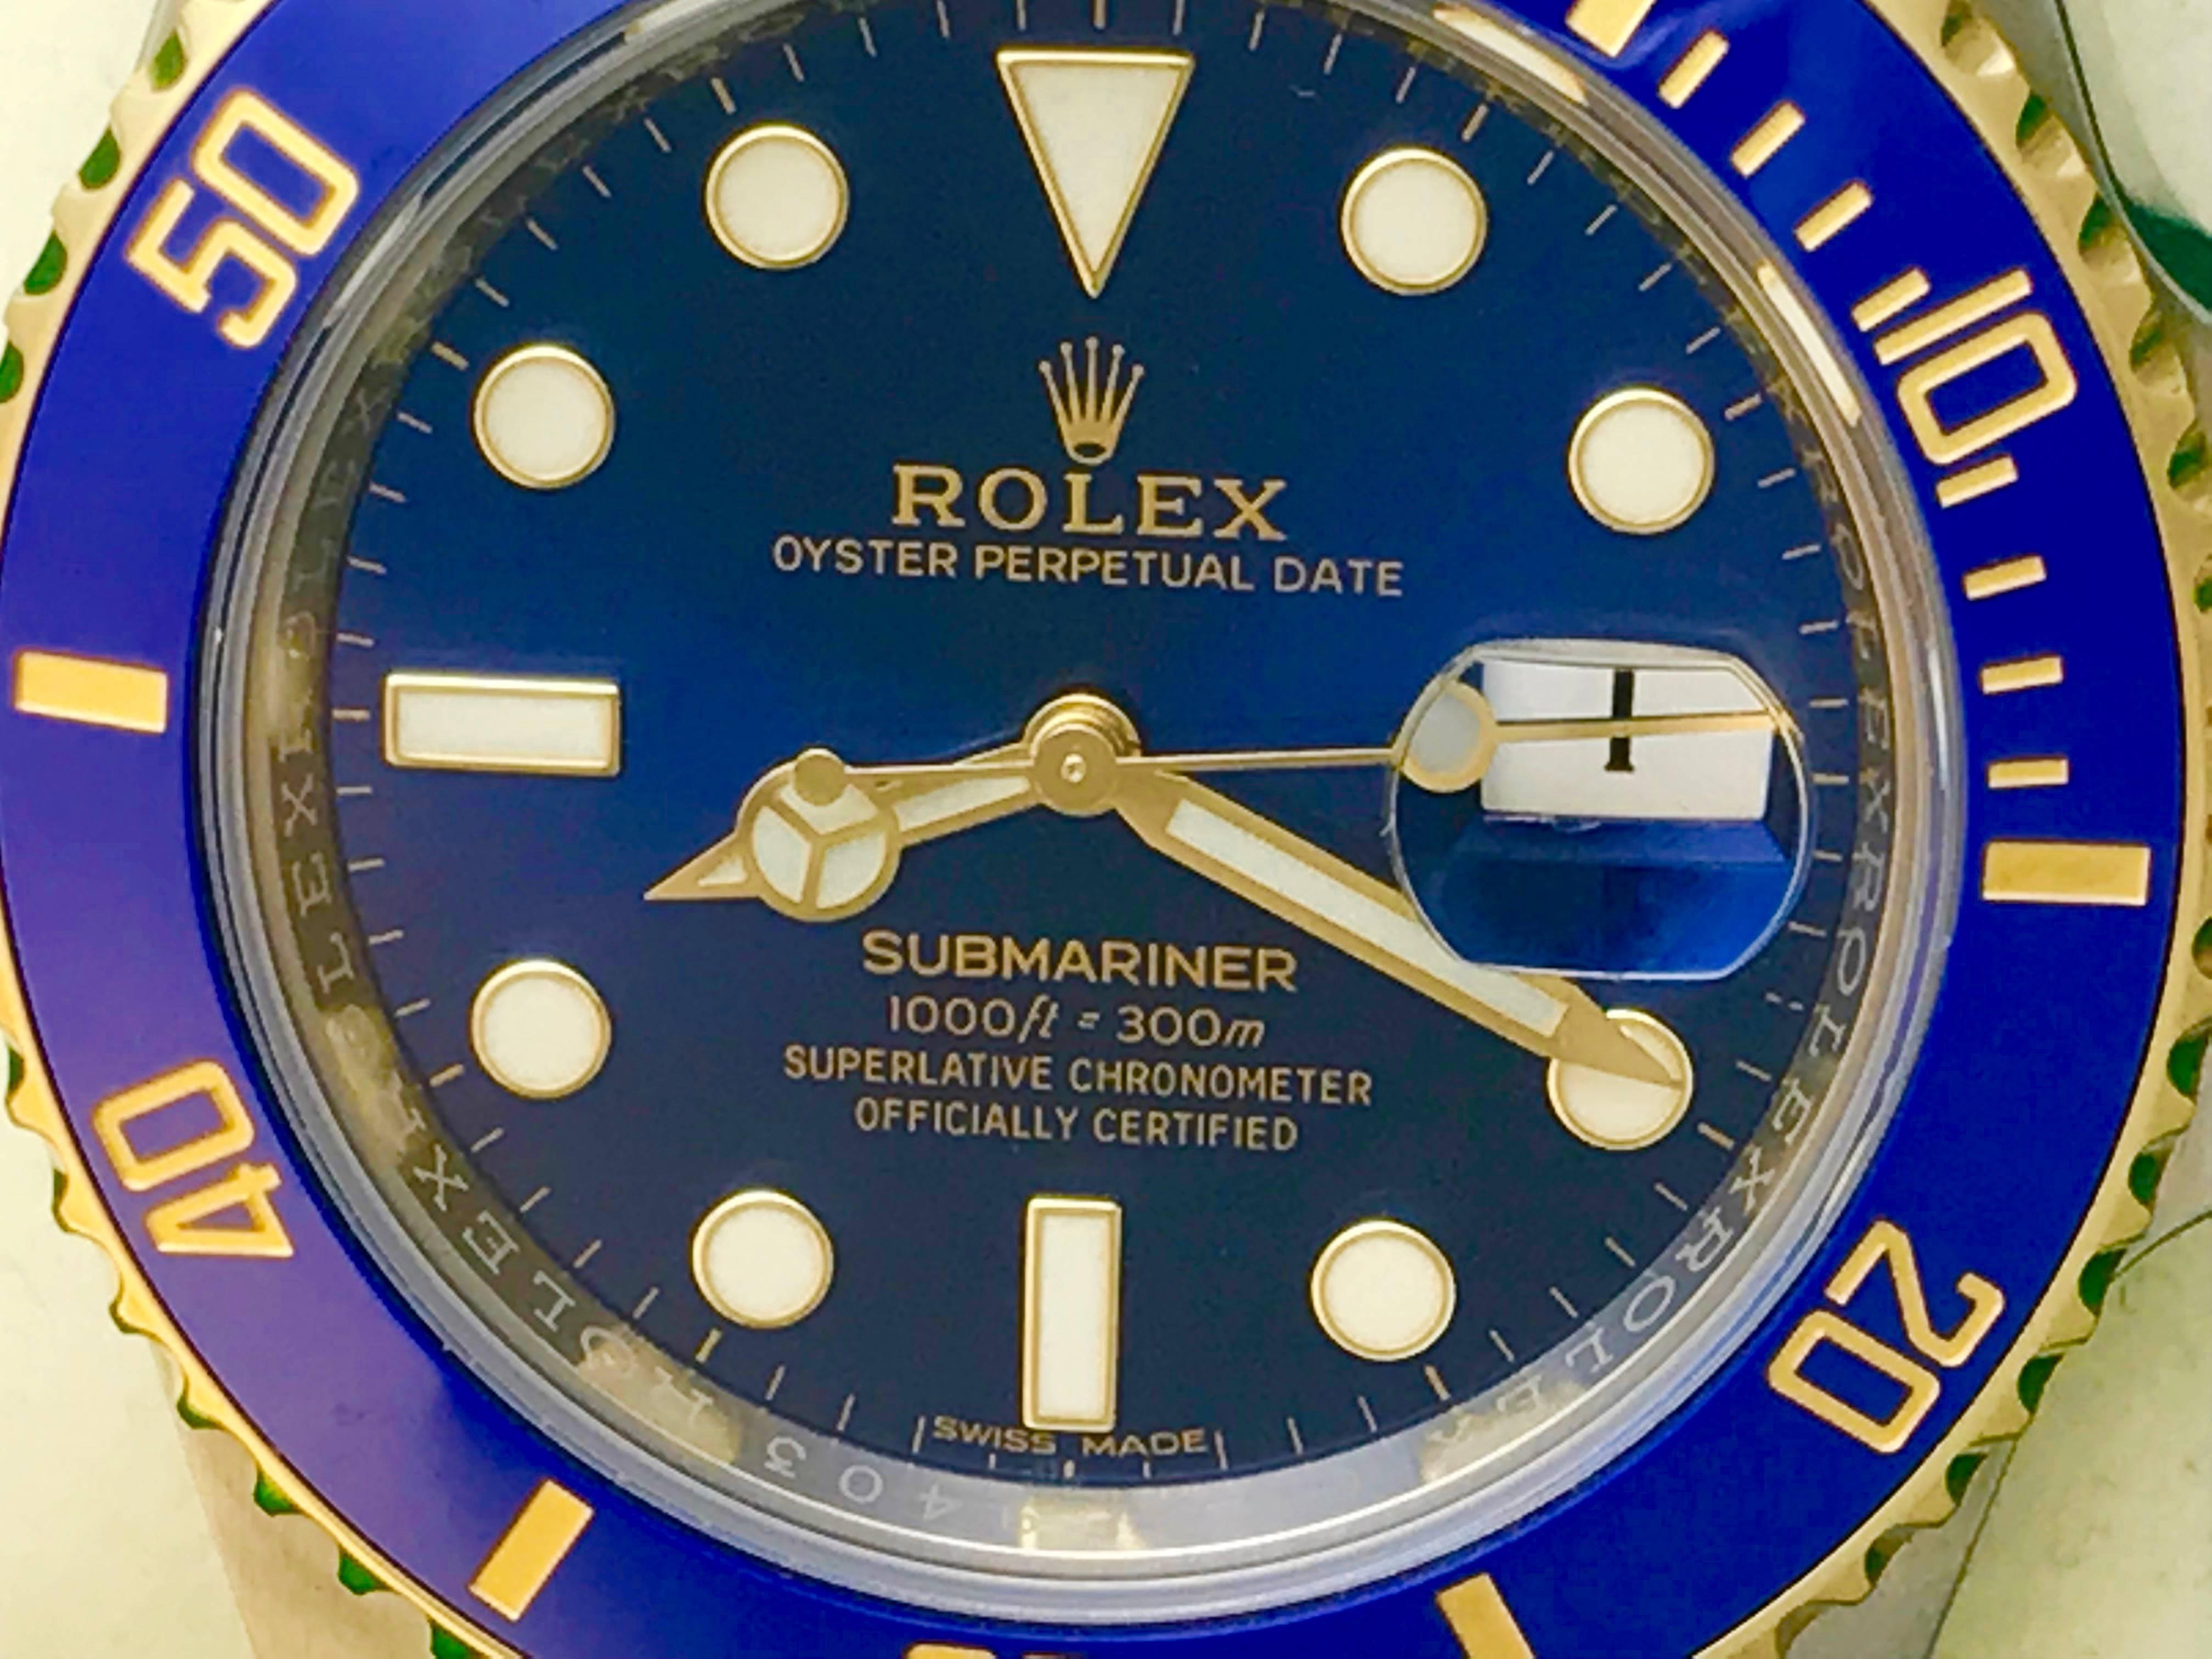 Like New Rolex Mens Submariner Model 116613LB at a great price.  Automatic Winding Oyster Perpetual Date Movement.  Features a Stainless Steel case with 18k Yellow Gold bezel with Blue ceramic insert, diameter 41mm. Stainless Steel & 18k Yellow Gold